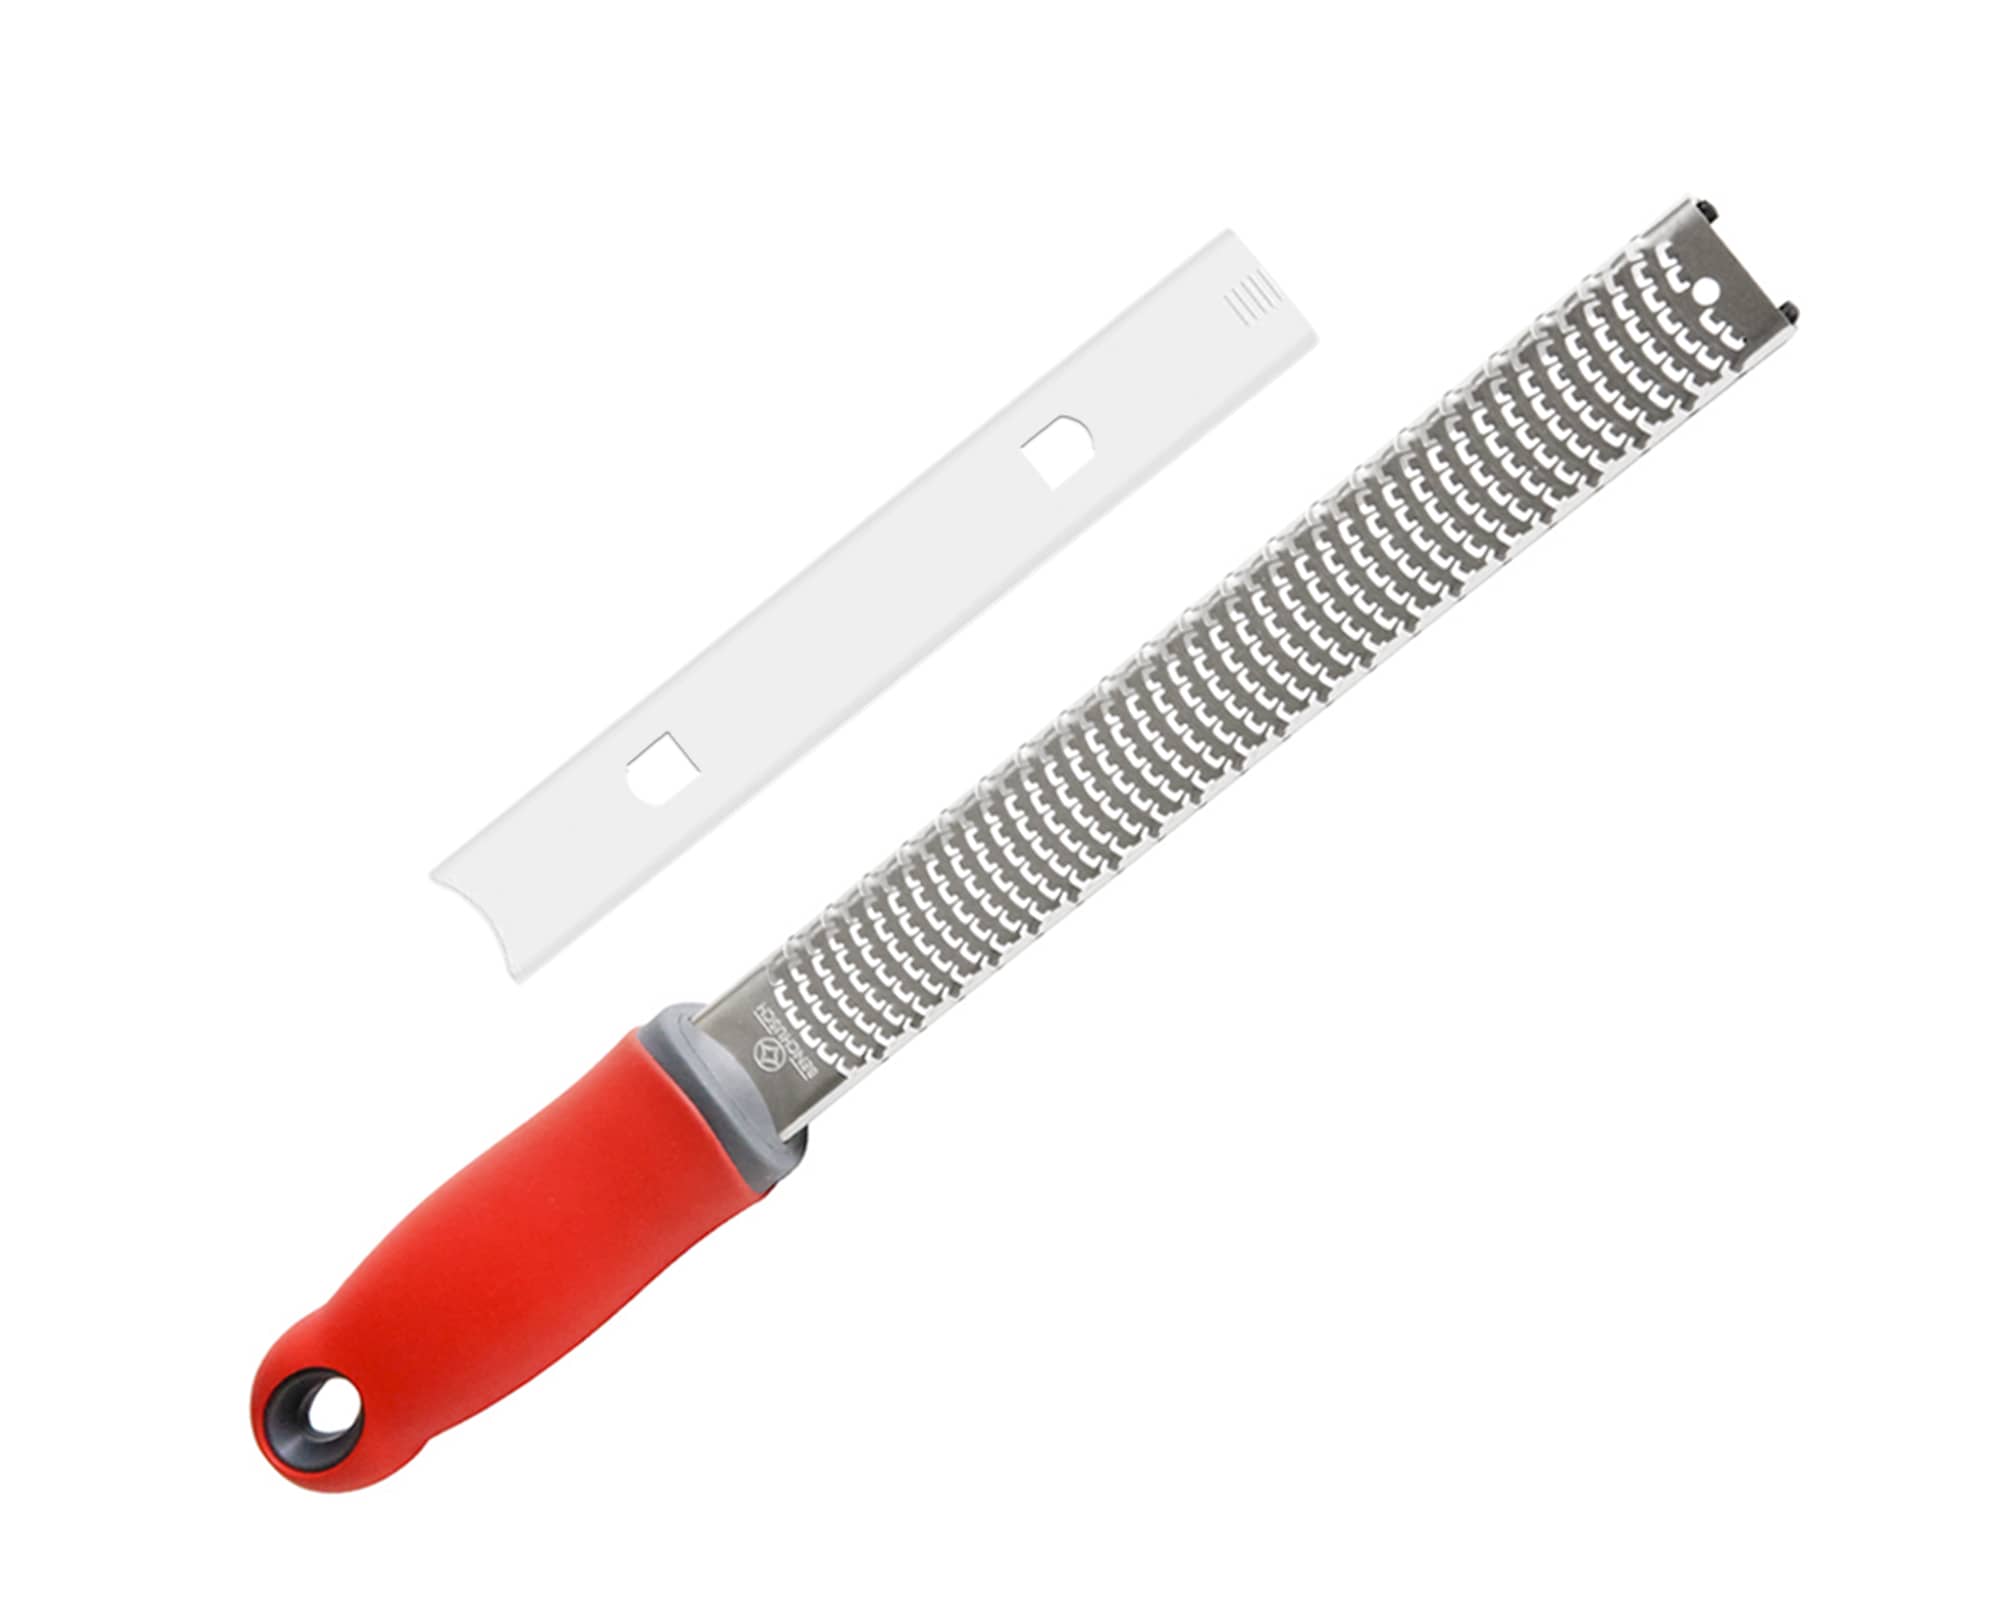 Benchusch Classic Red Cheese Grater with 18/8 Stainless Steel Razor Shape Blade, PP protective cover and Silicone Handle